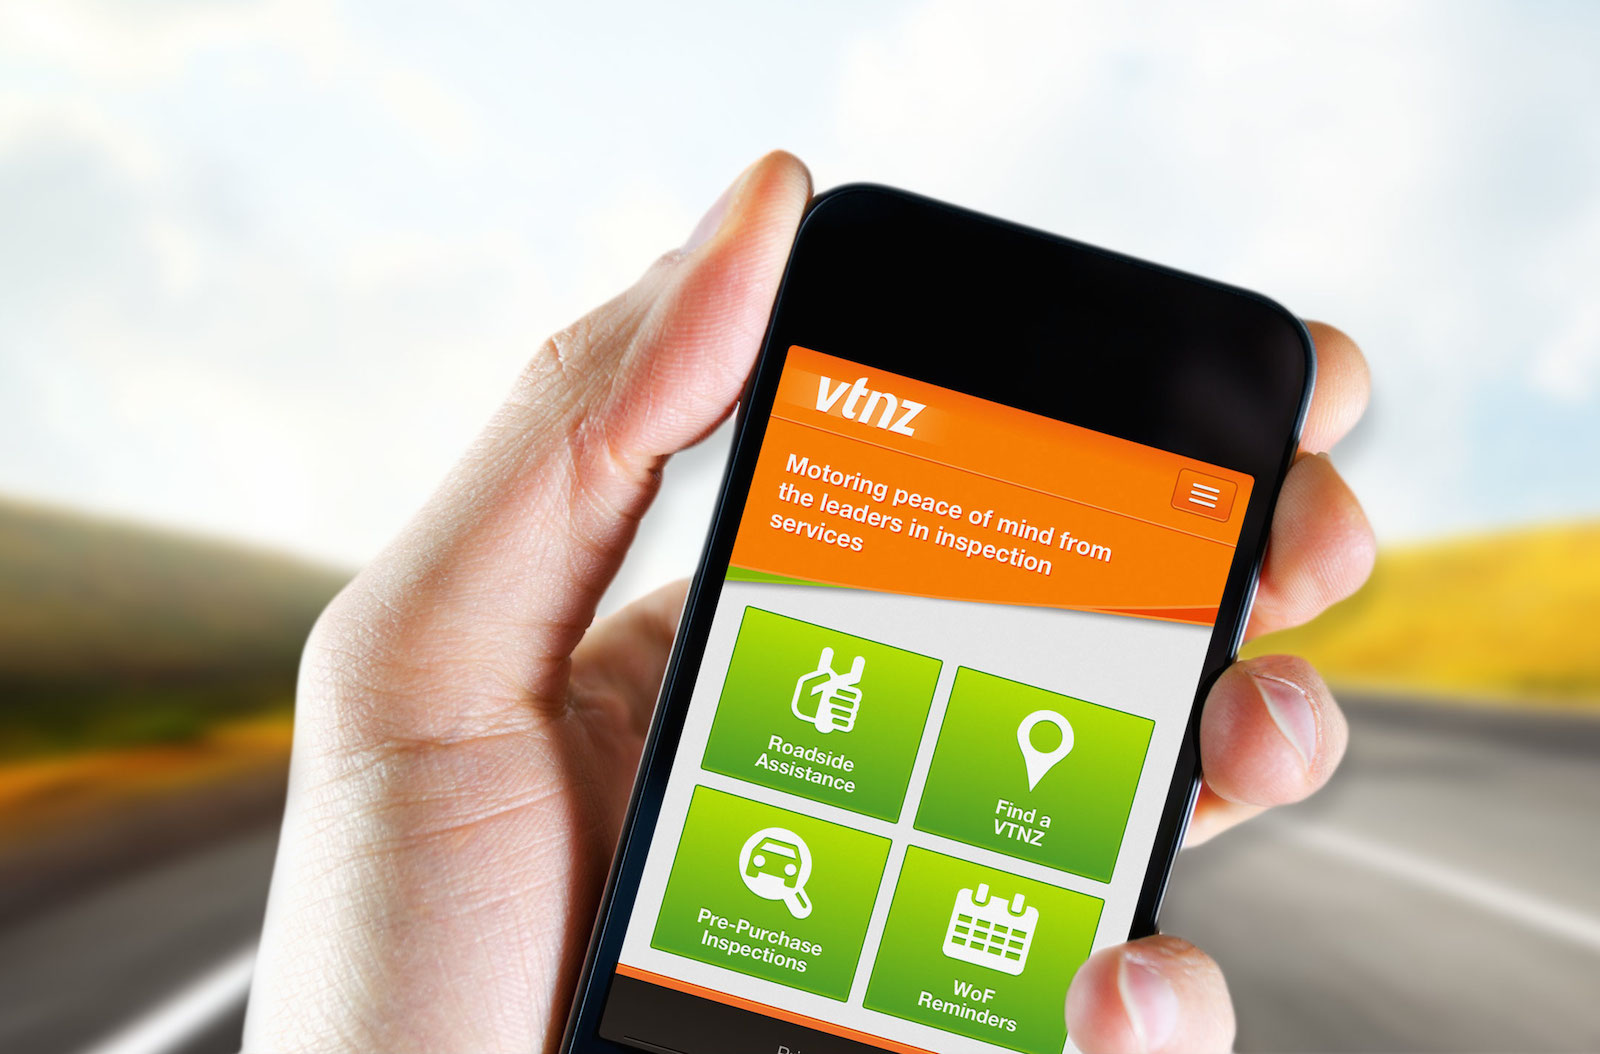 Photo of hand holding a mobile phone showing the VTNZ mobile website